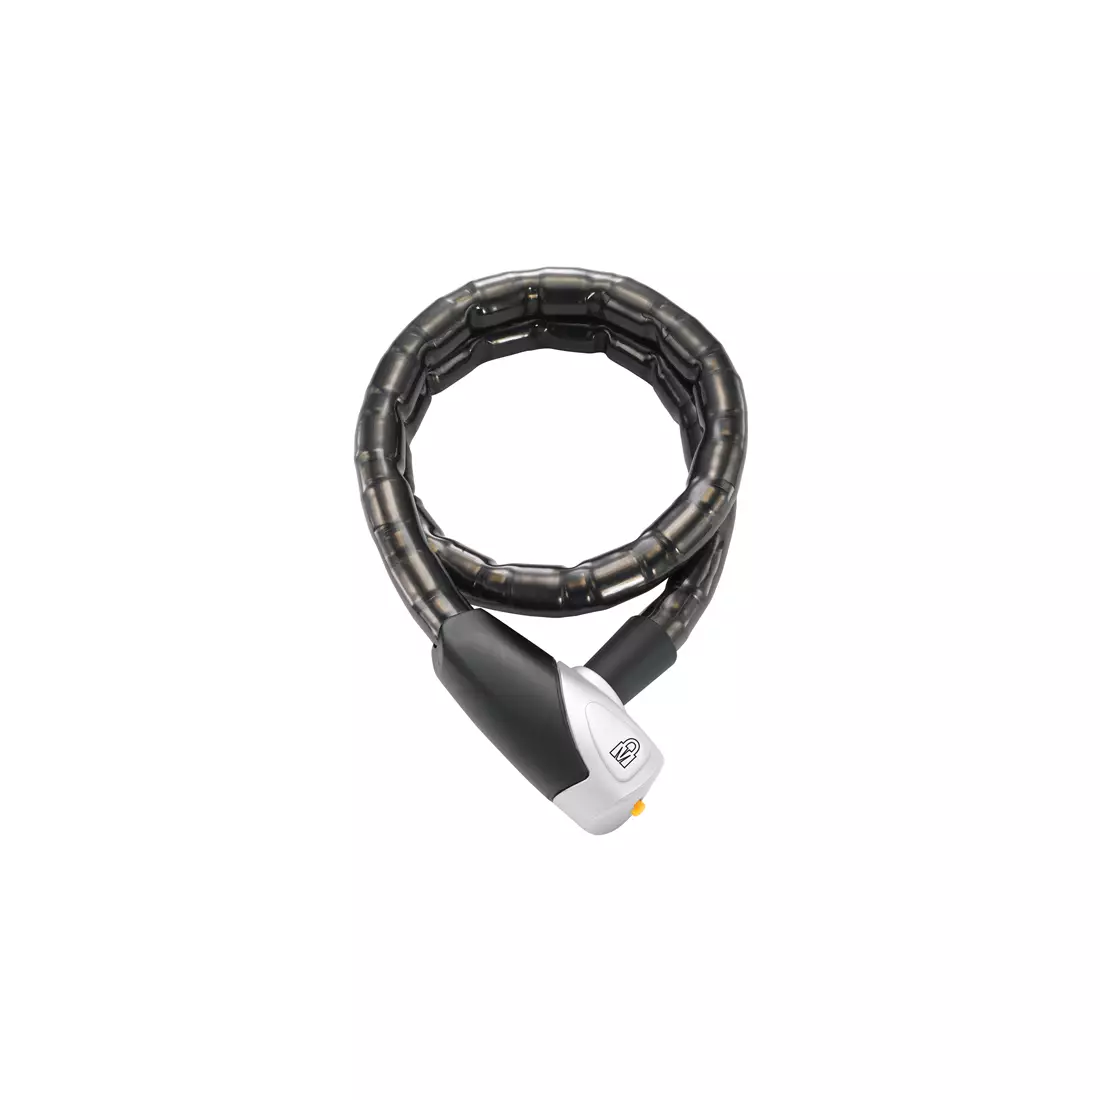 MAGNUM bicycle lock cord 110cm 5 keys with a code black MGN-3013